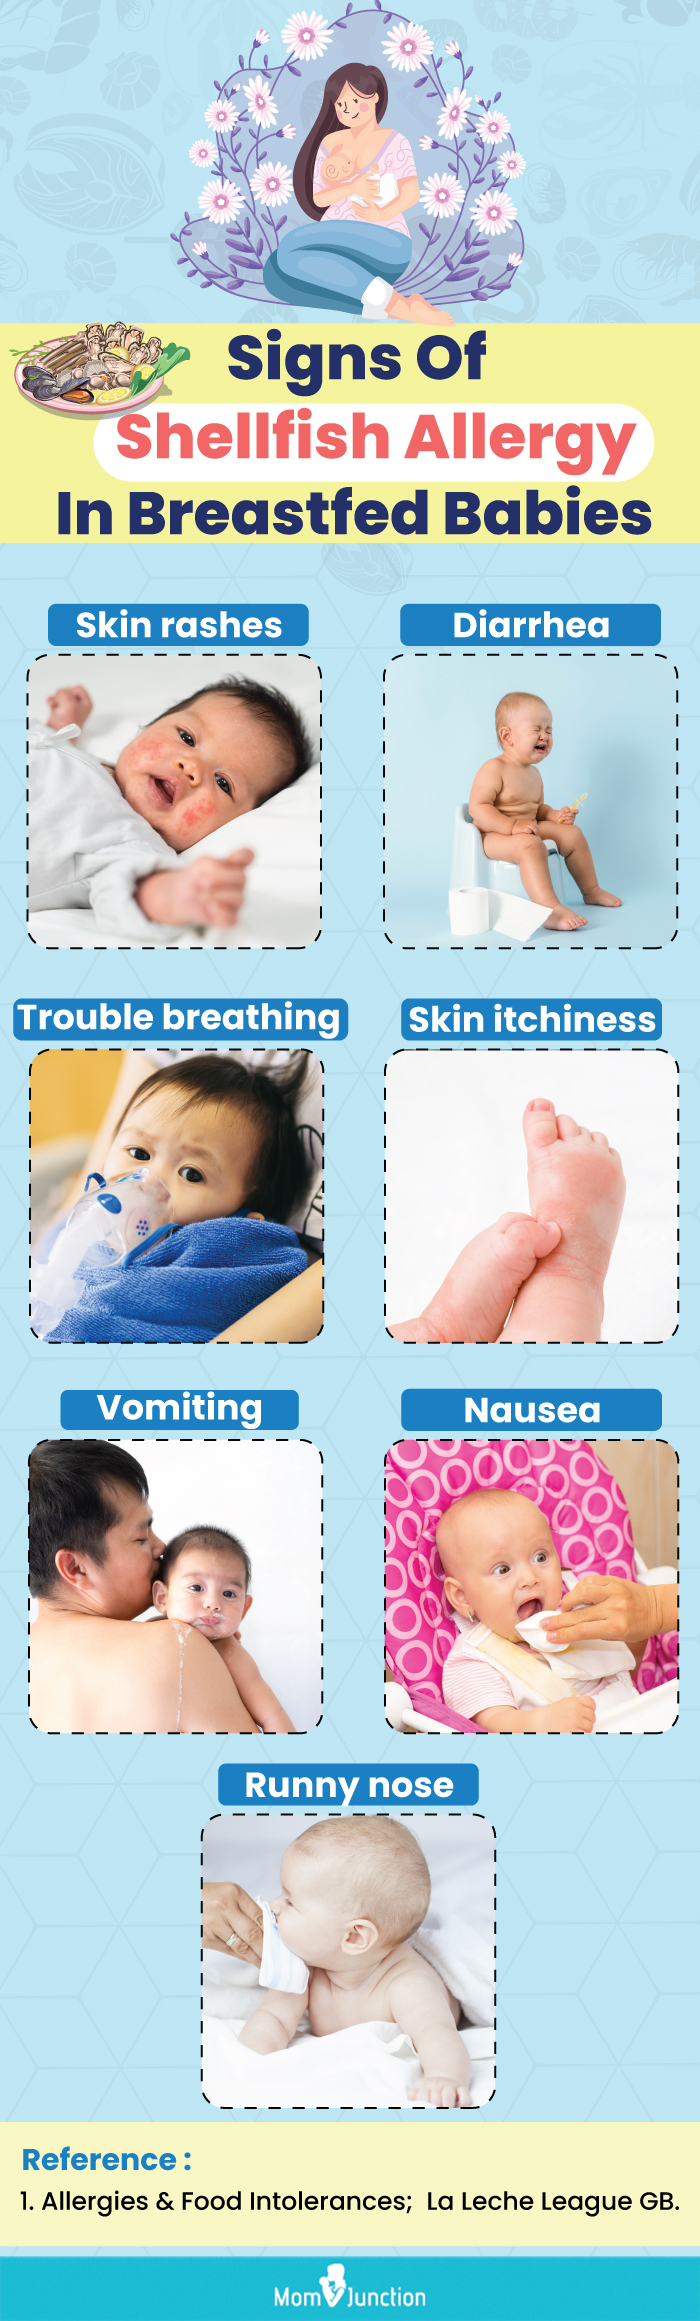 signs of shellfish allergy in breastfed babies (infographic)